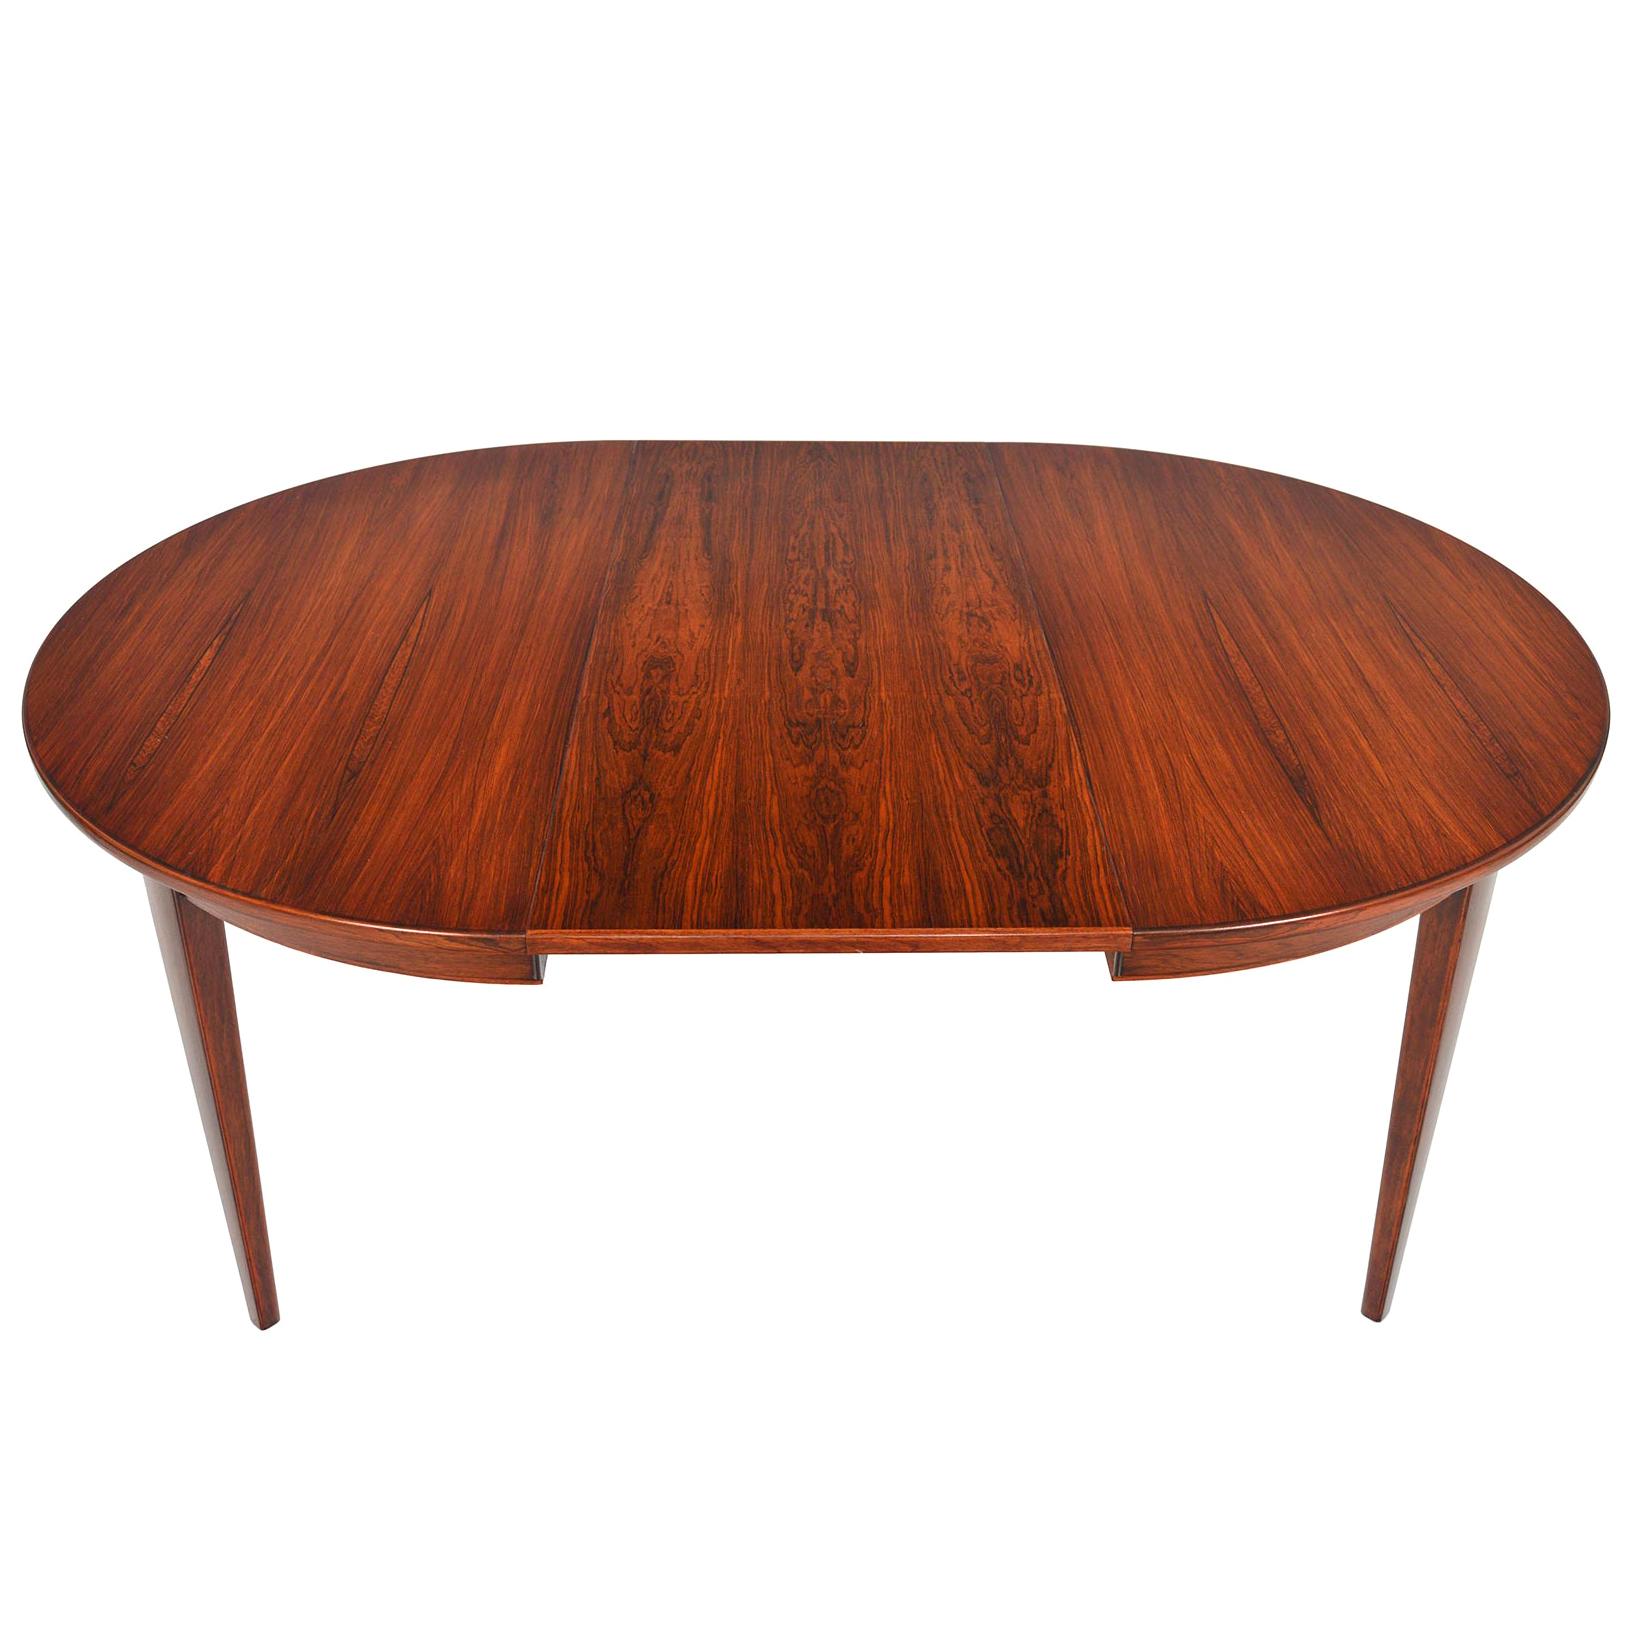 Danish Modern Round Brazilian Rosewood Table with Leaf